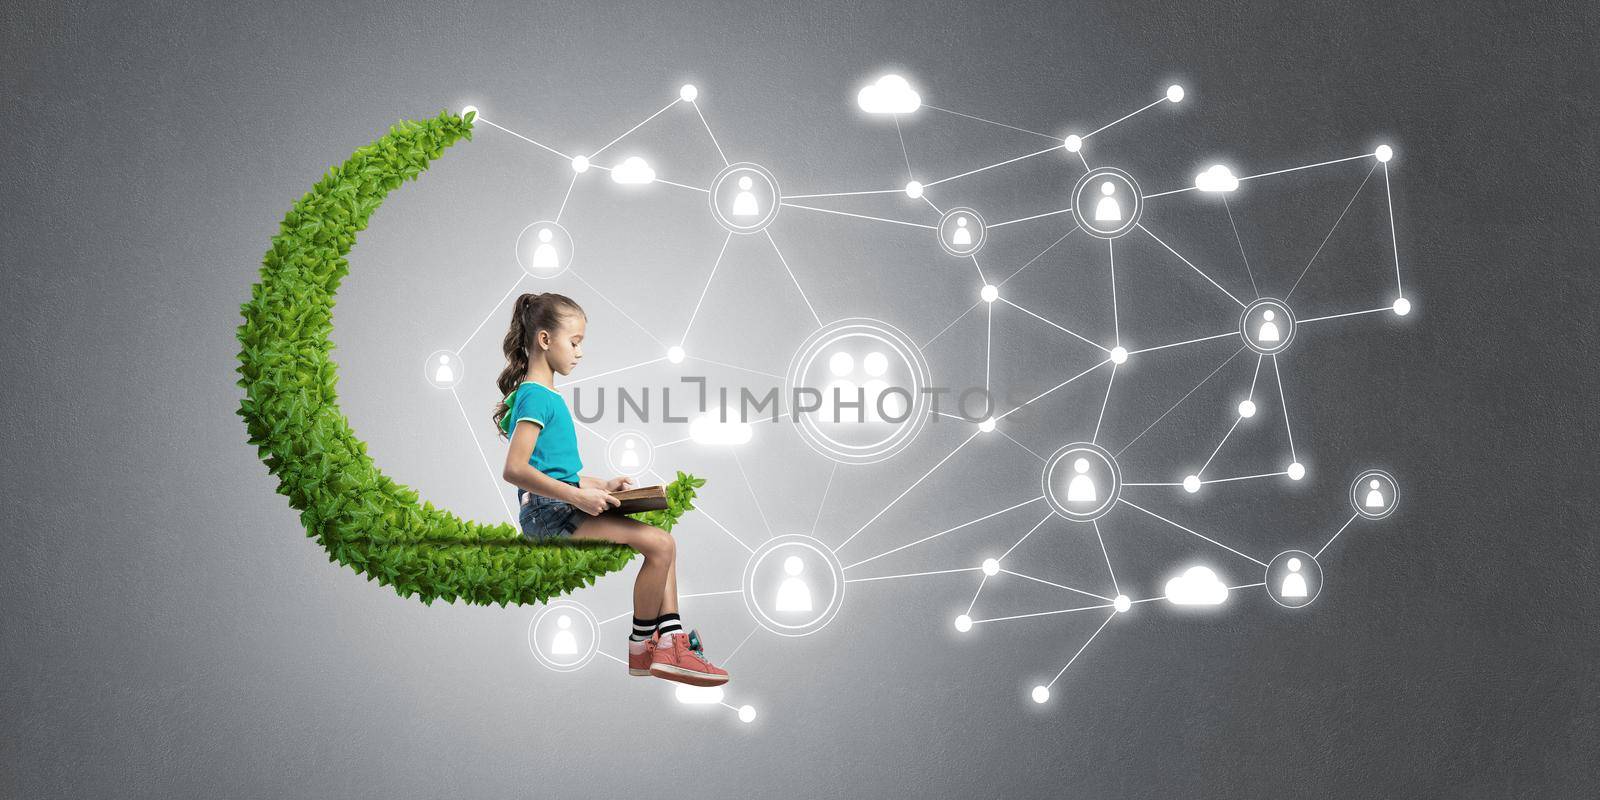 Idea of children Internet communication or online playing and electronic education by adam121